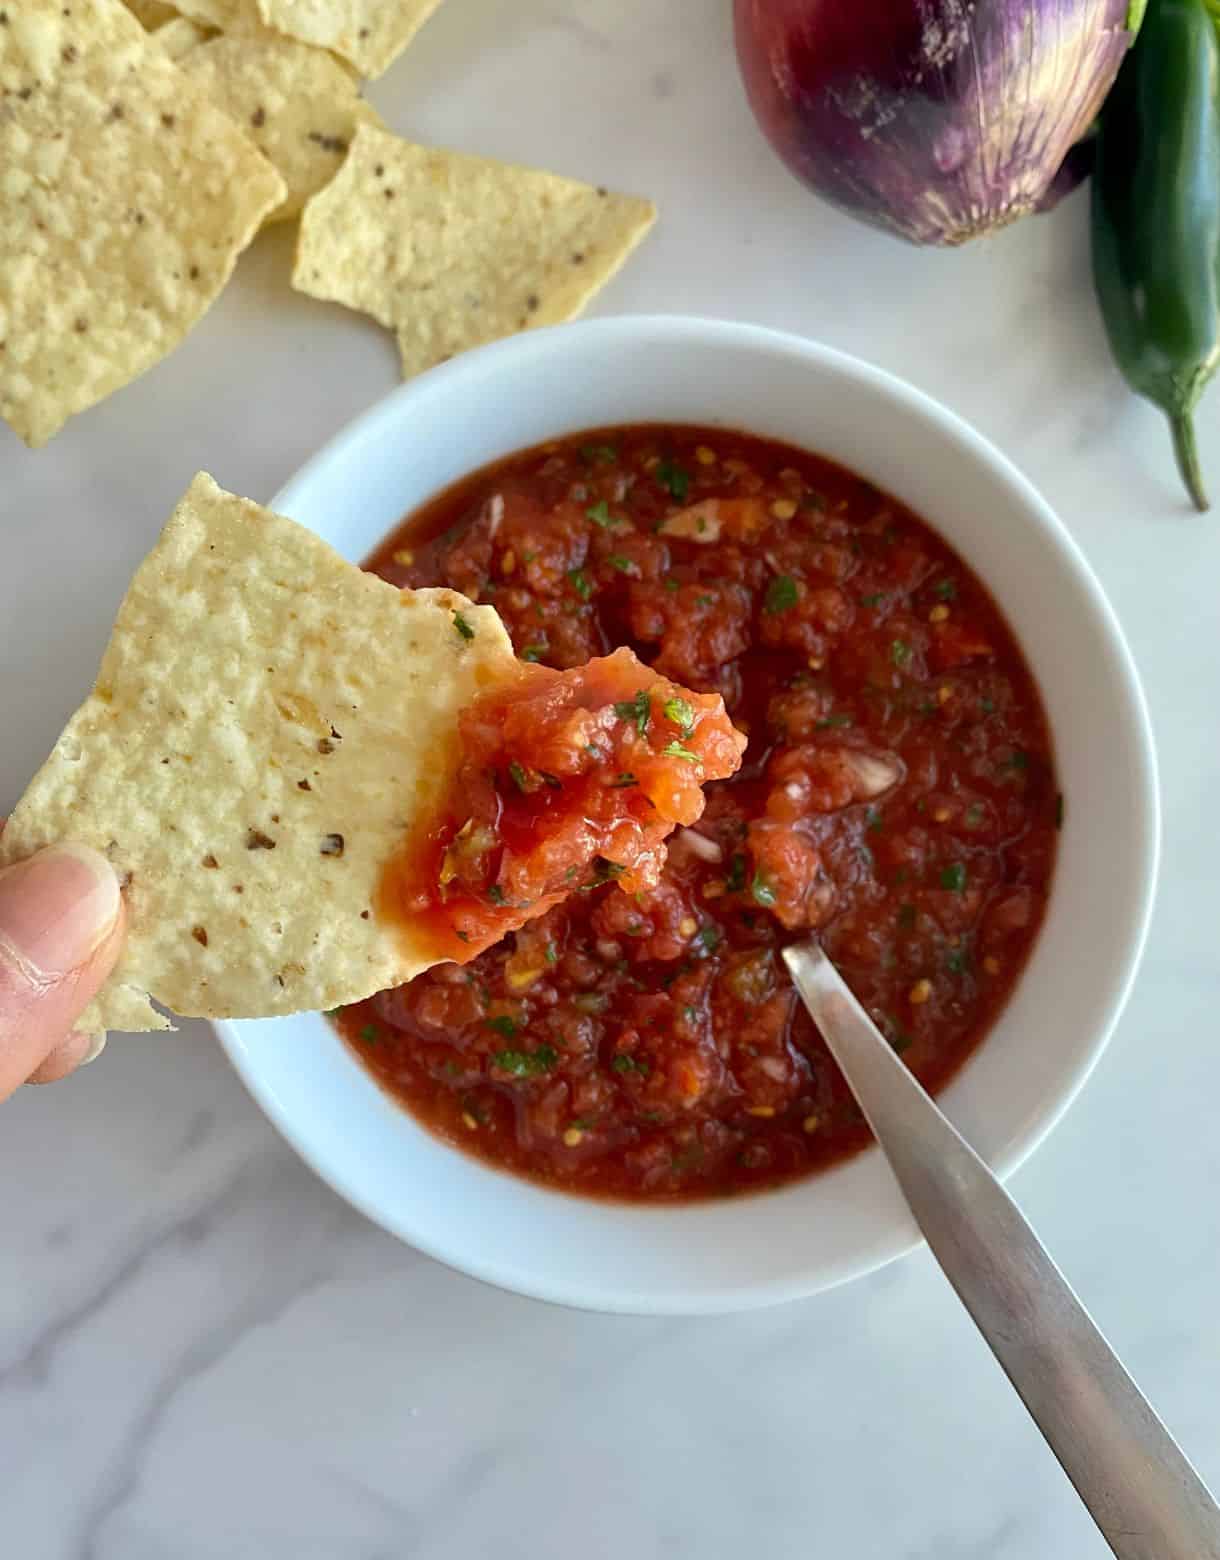 A bowl of Jalapeno Salsa with a spoon and a chip dipped in the salsa.